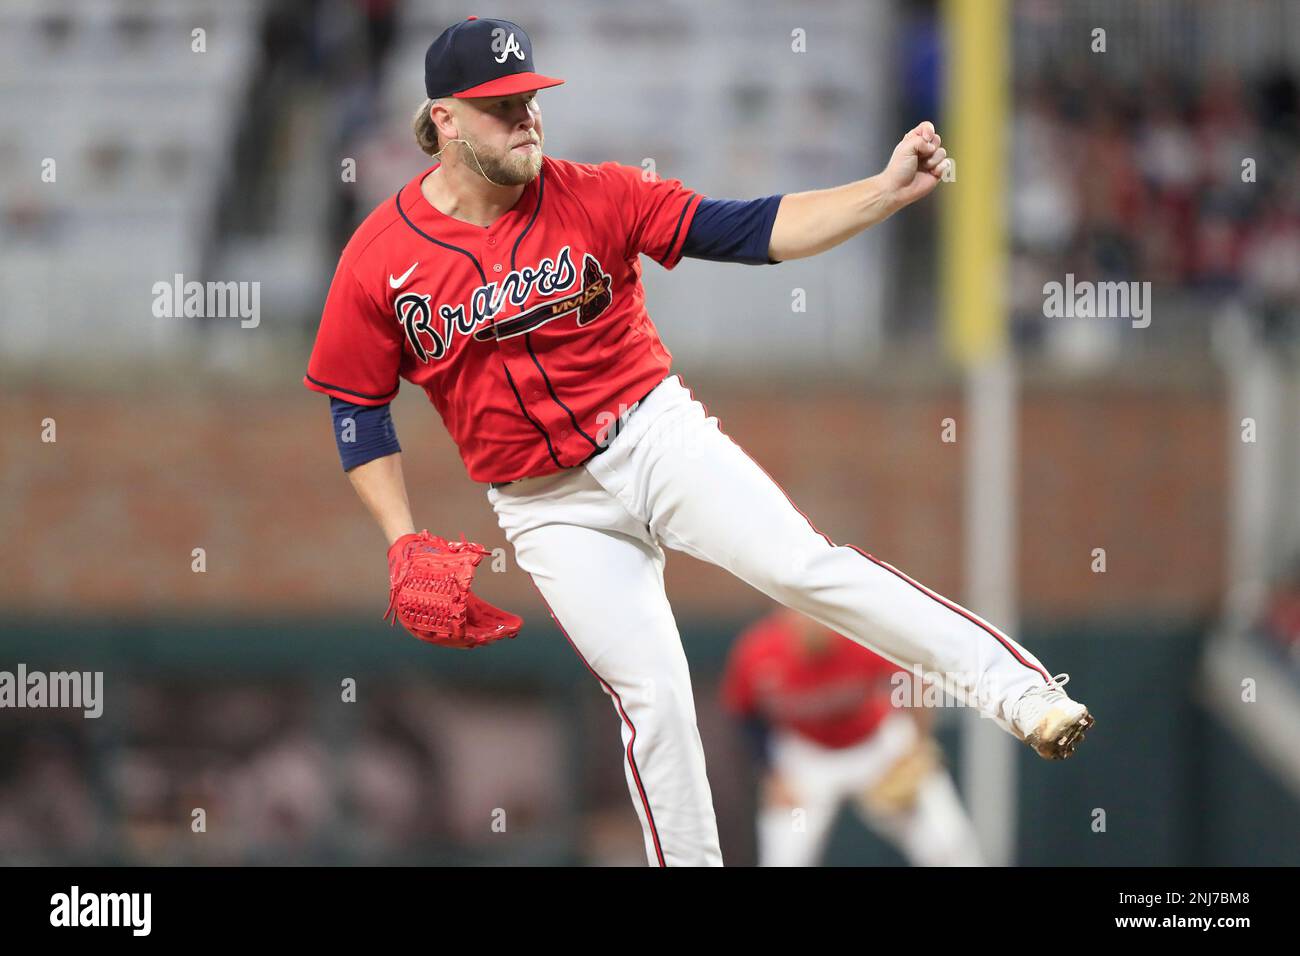 ATLANTA, GA - SEPTEMBER 30: Atlanta Braves relief pitcher A.J. Minter (33)  delivers a pitch during the Friday evening MLB game between the New York  Mets and the Atlanta Braves on September